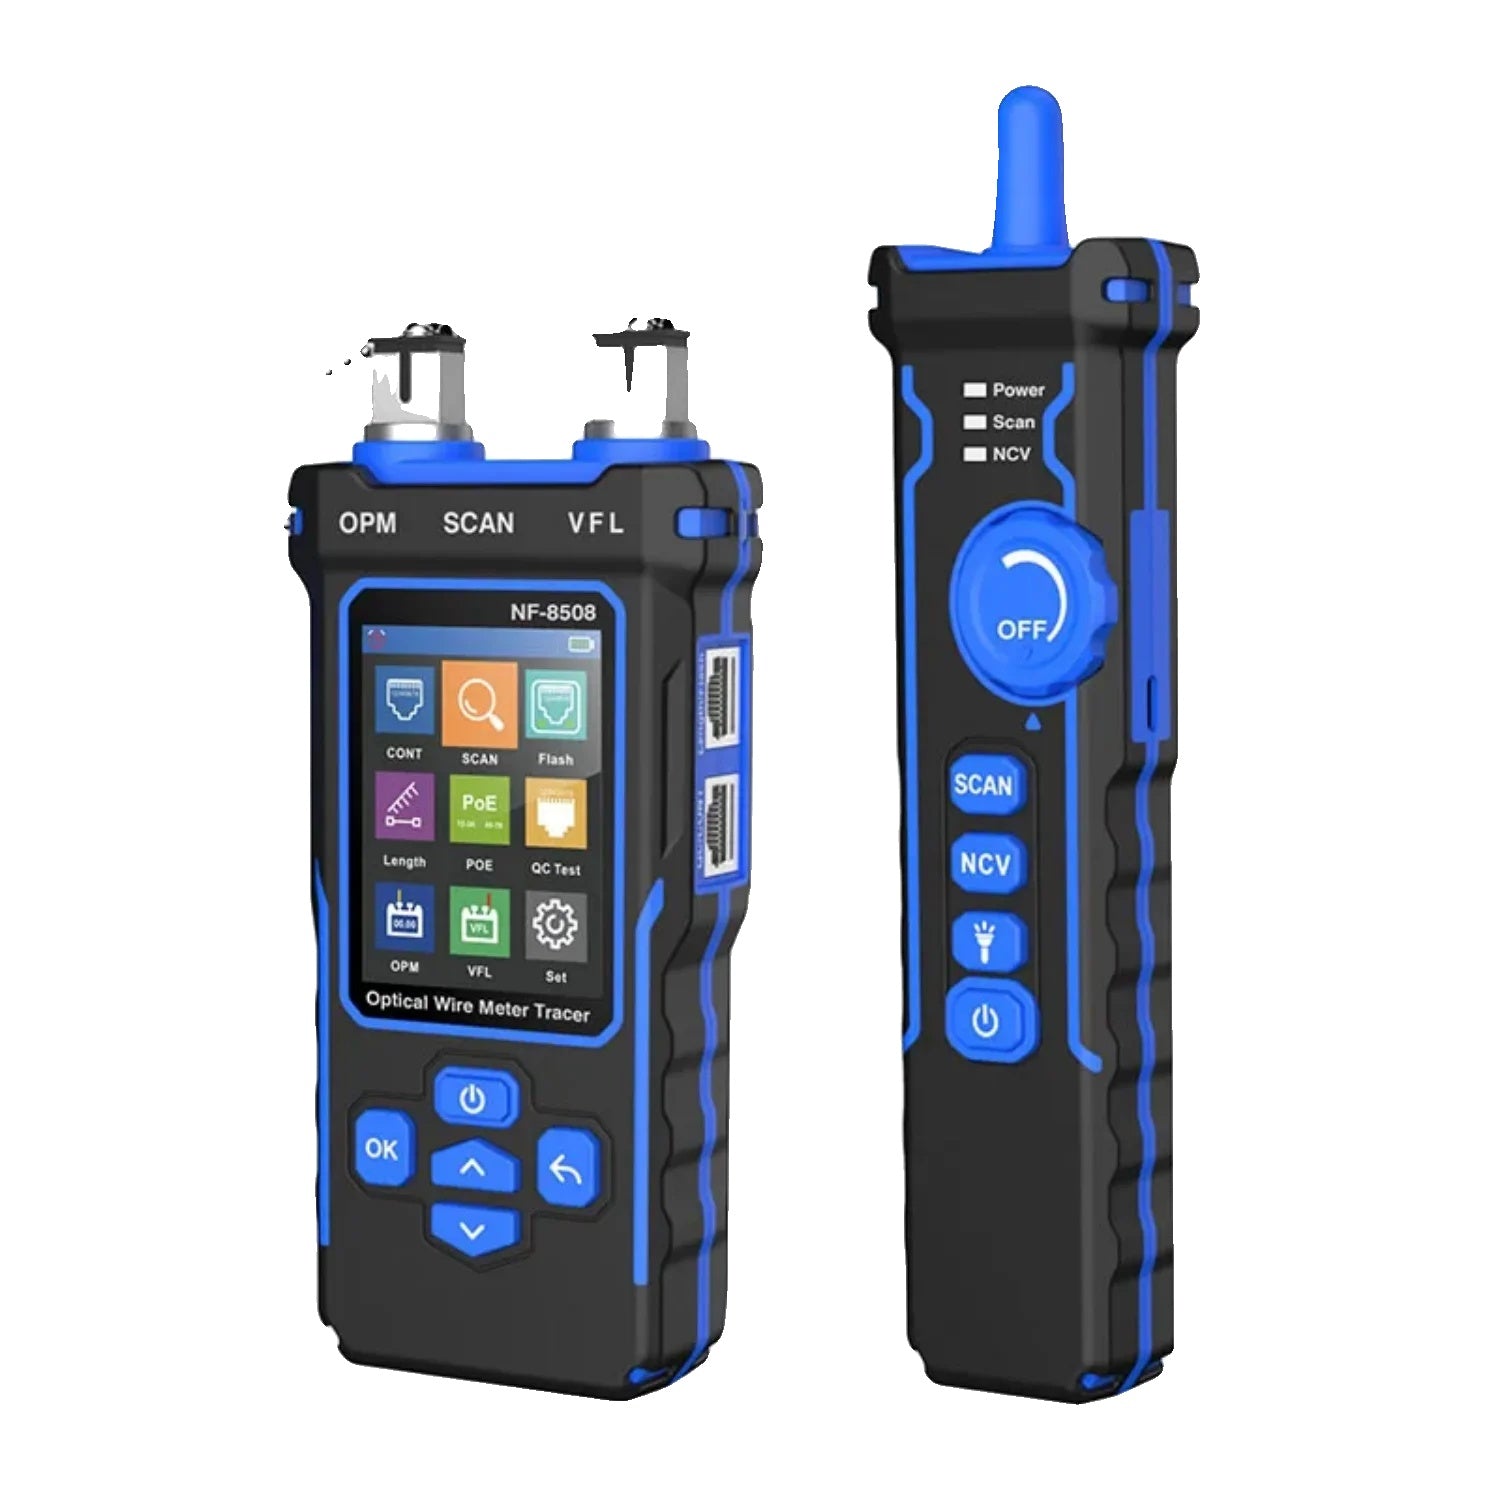 Network Cable Tester, LCD Display, Measure Length